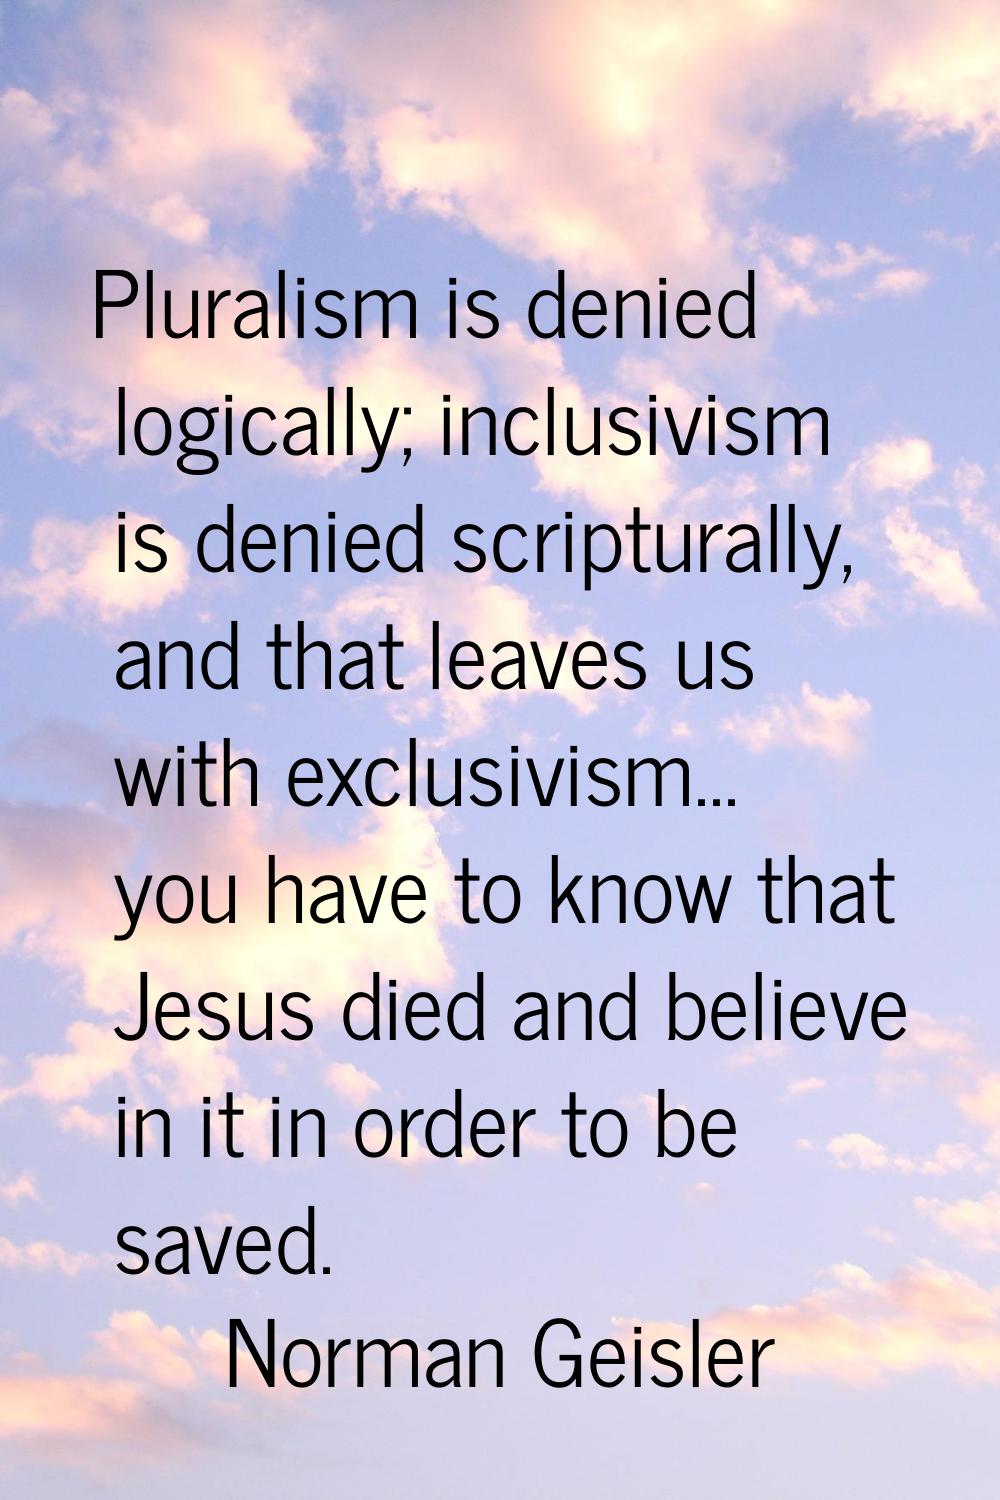 Pluralism is denied logically; inclusivism is denied scripturally, and that leaves us with exclusiv